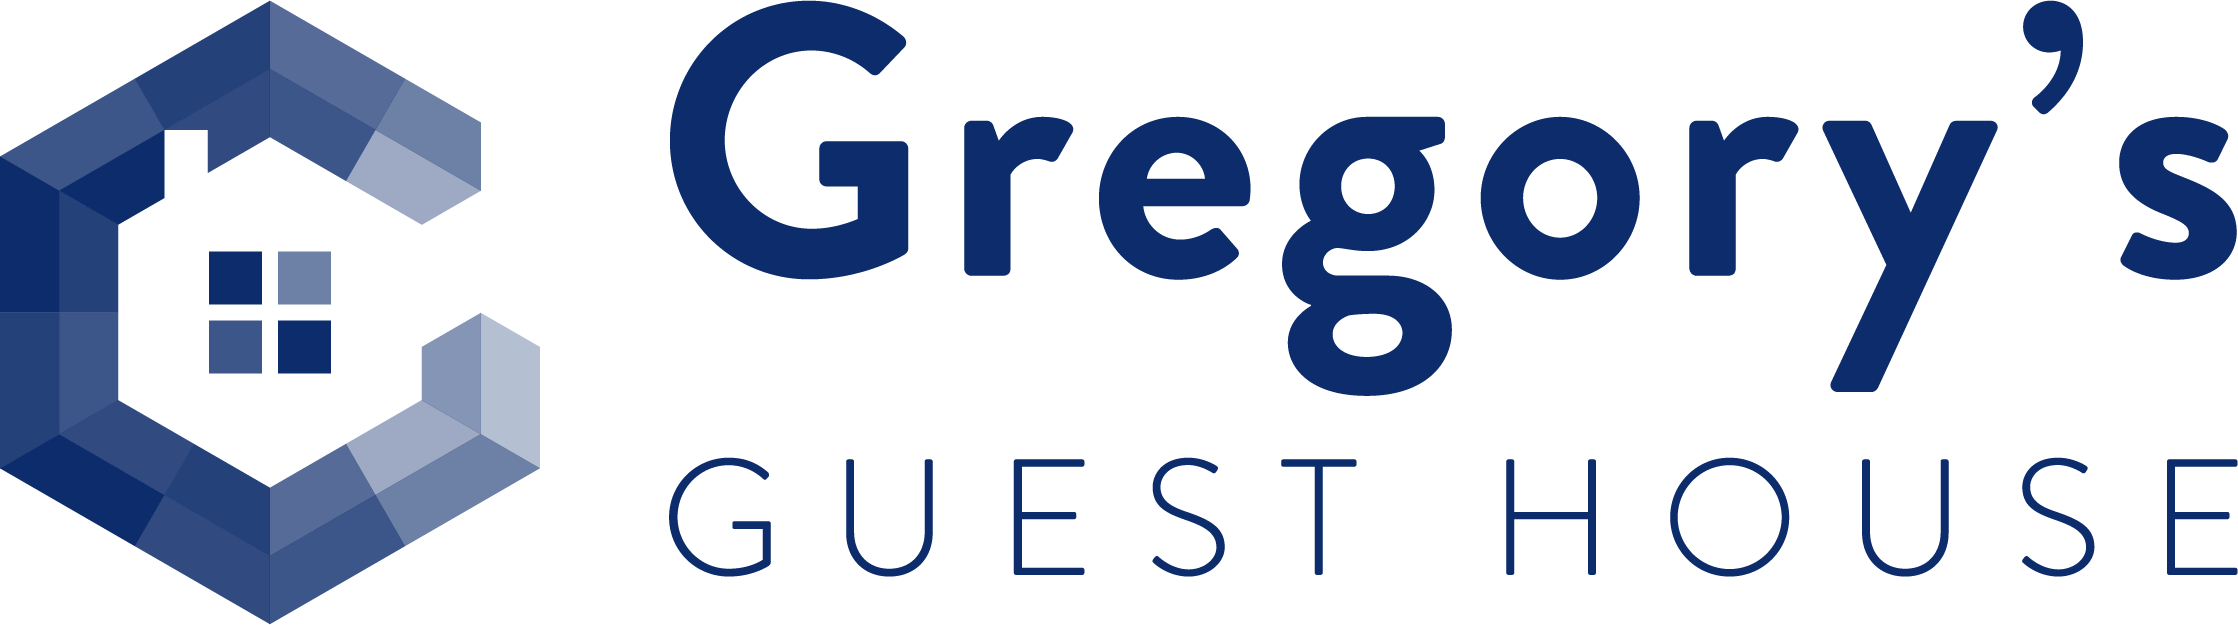 Gregory’s Guest House